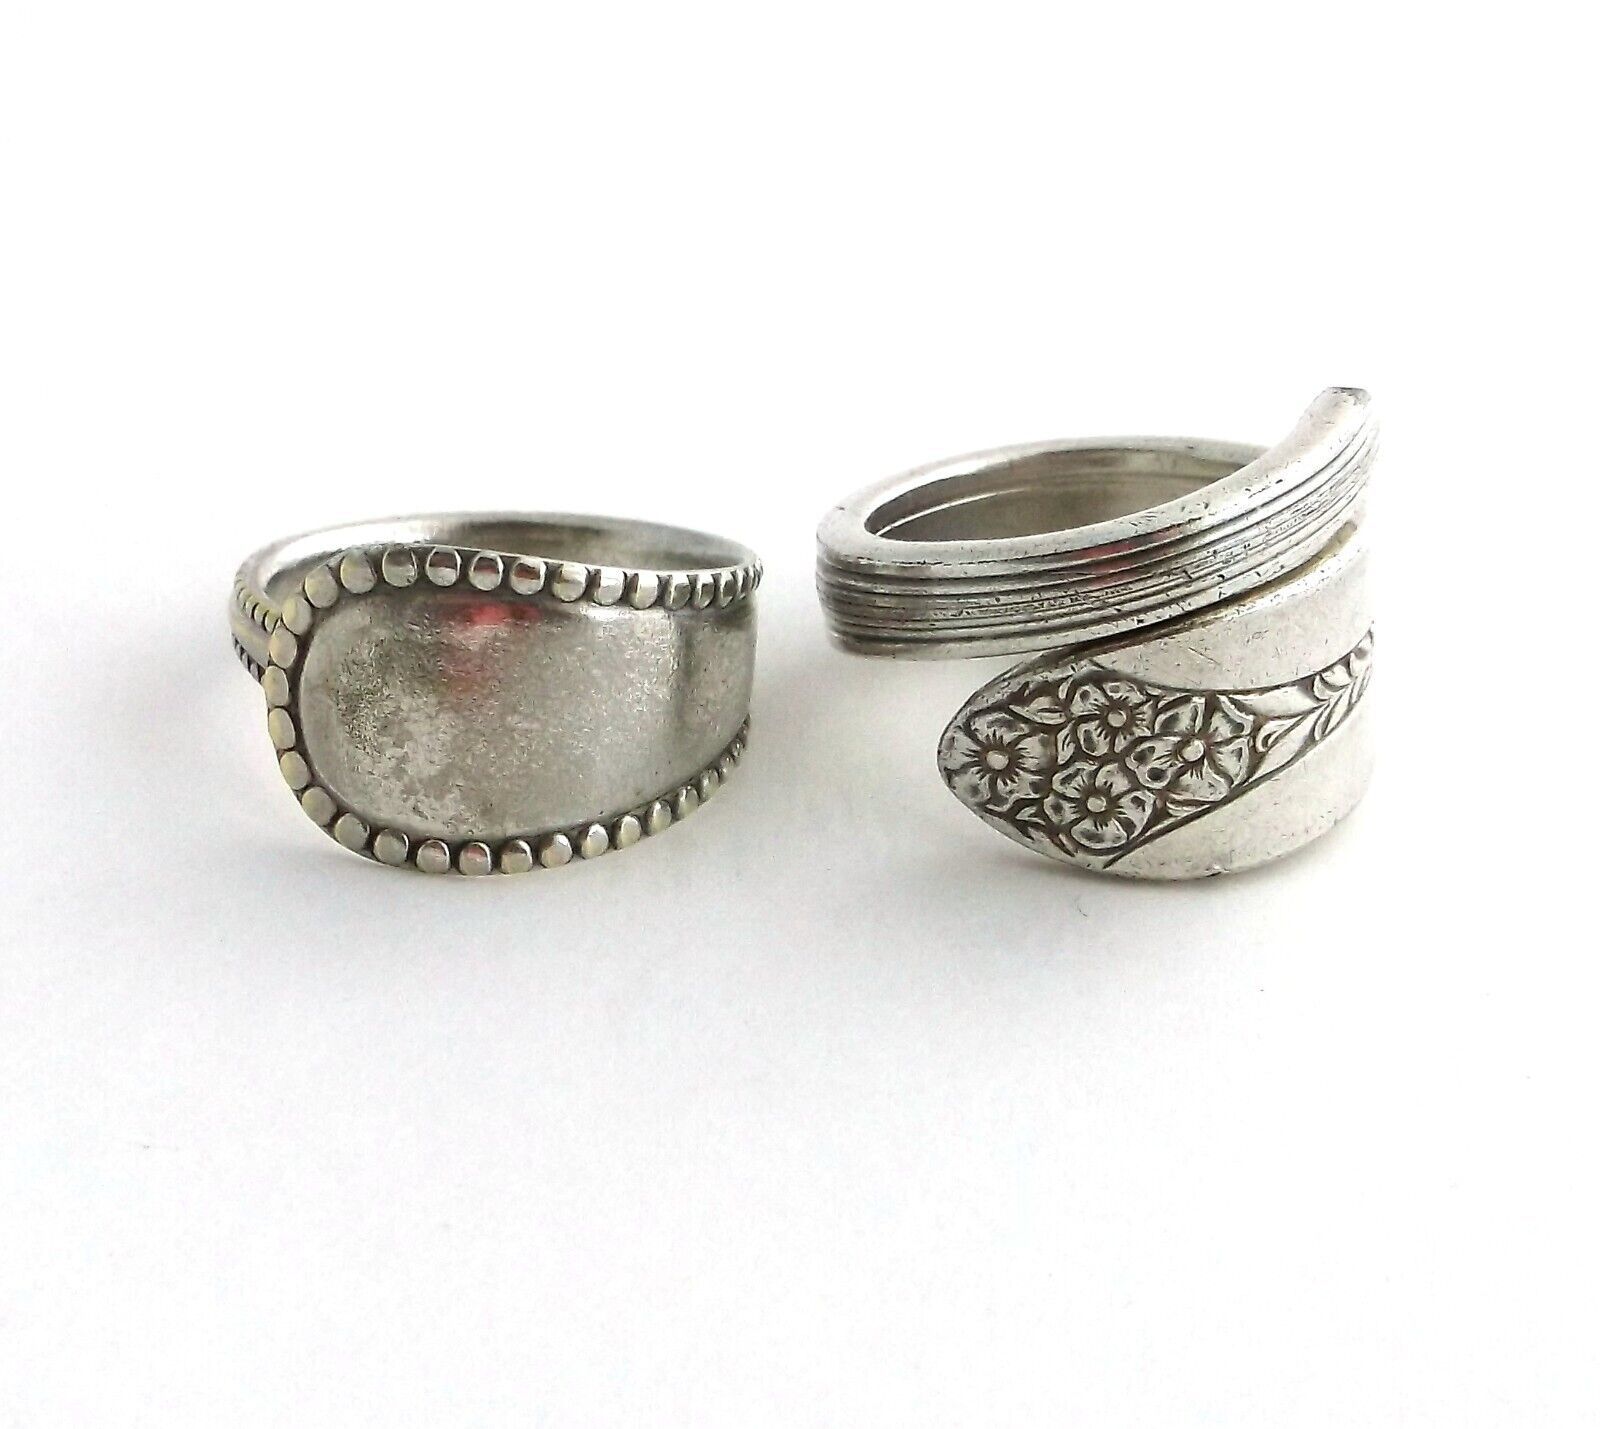 Primary image for Spoon Ring Lot Size 9 And 10 Artisan Made From Used Silverware Band Bypass